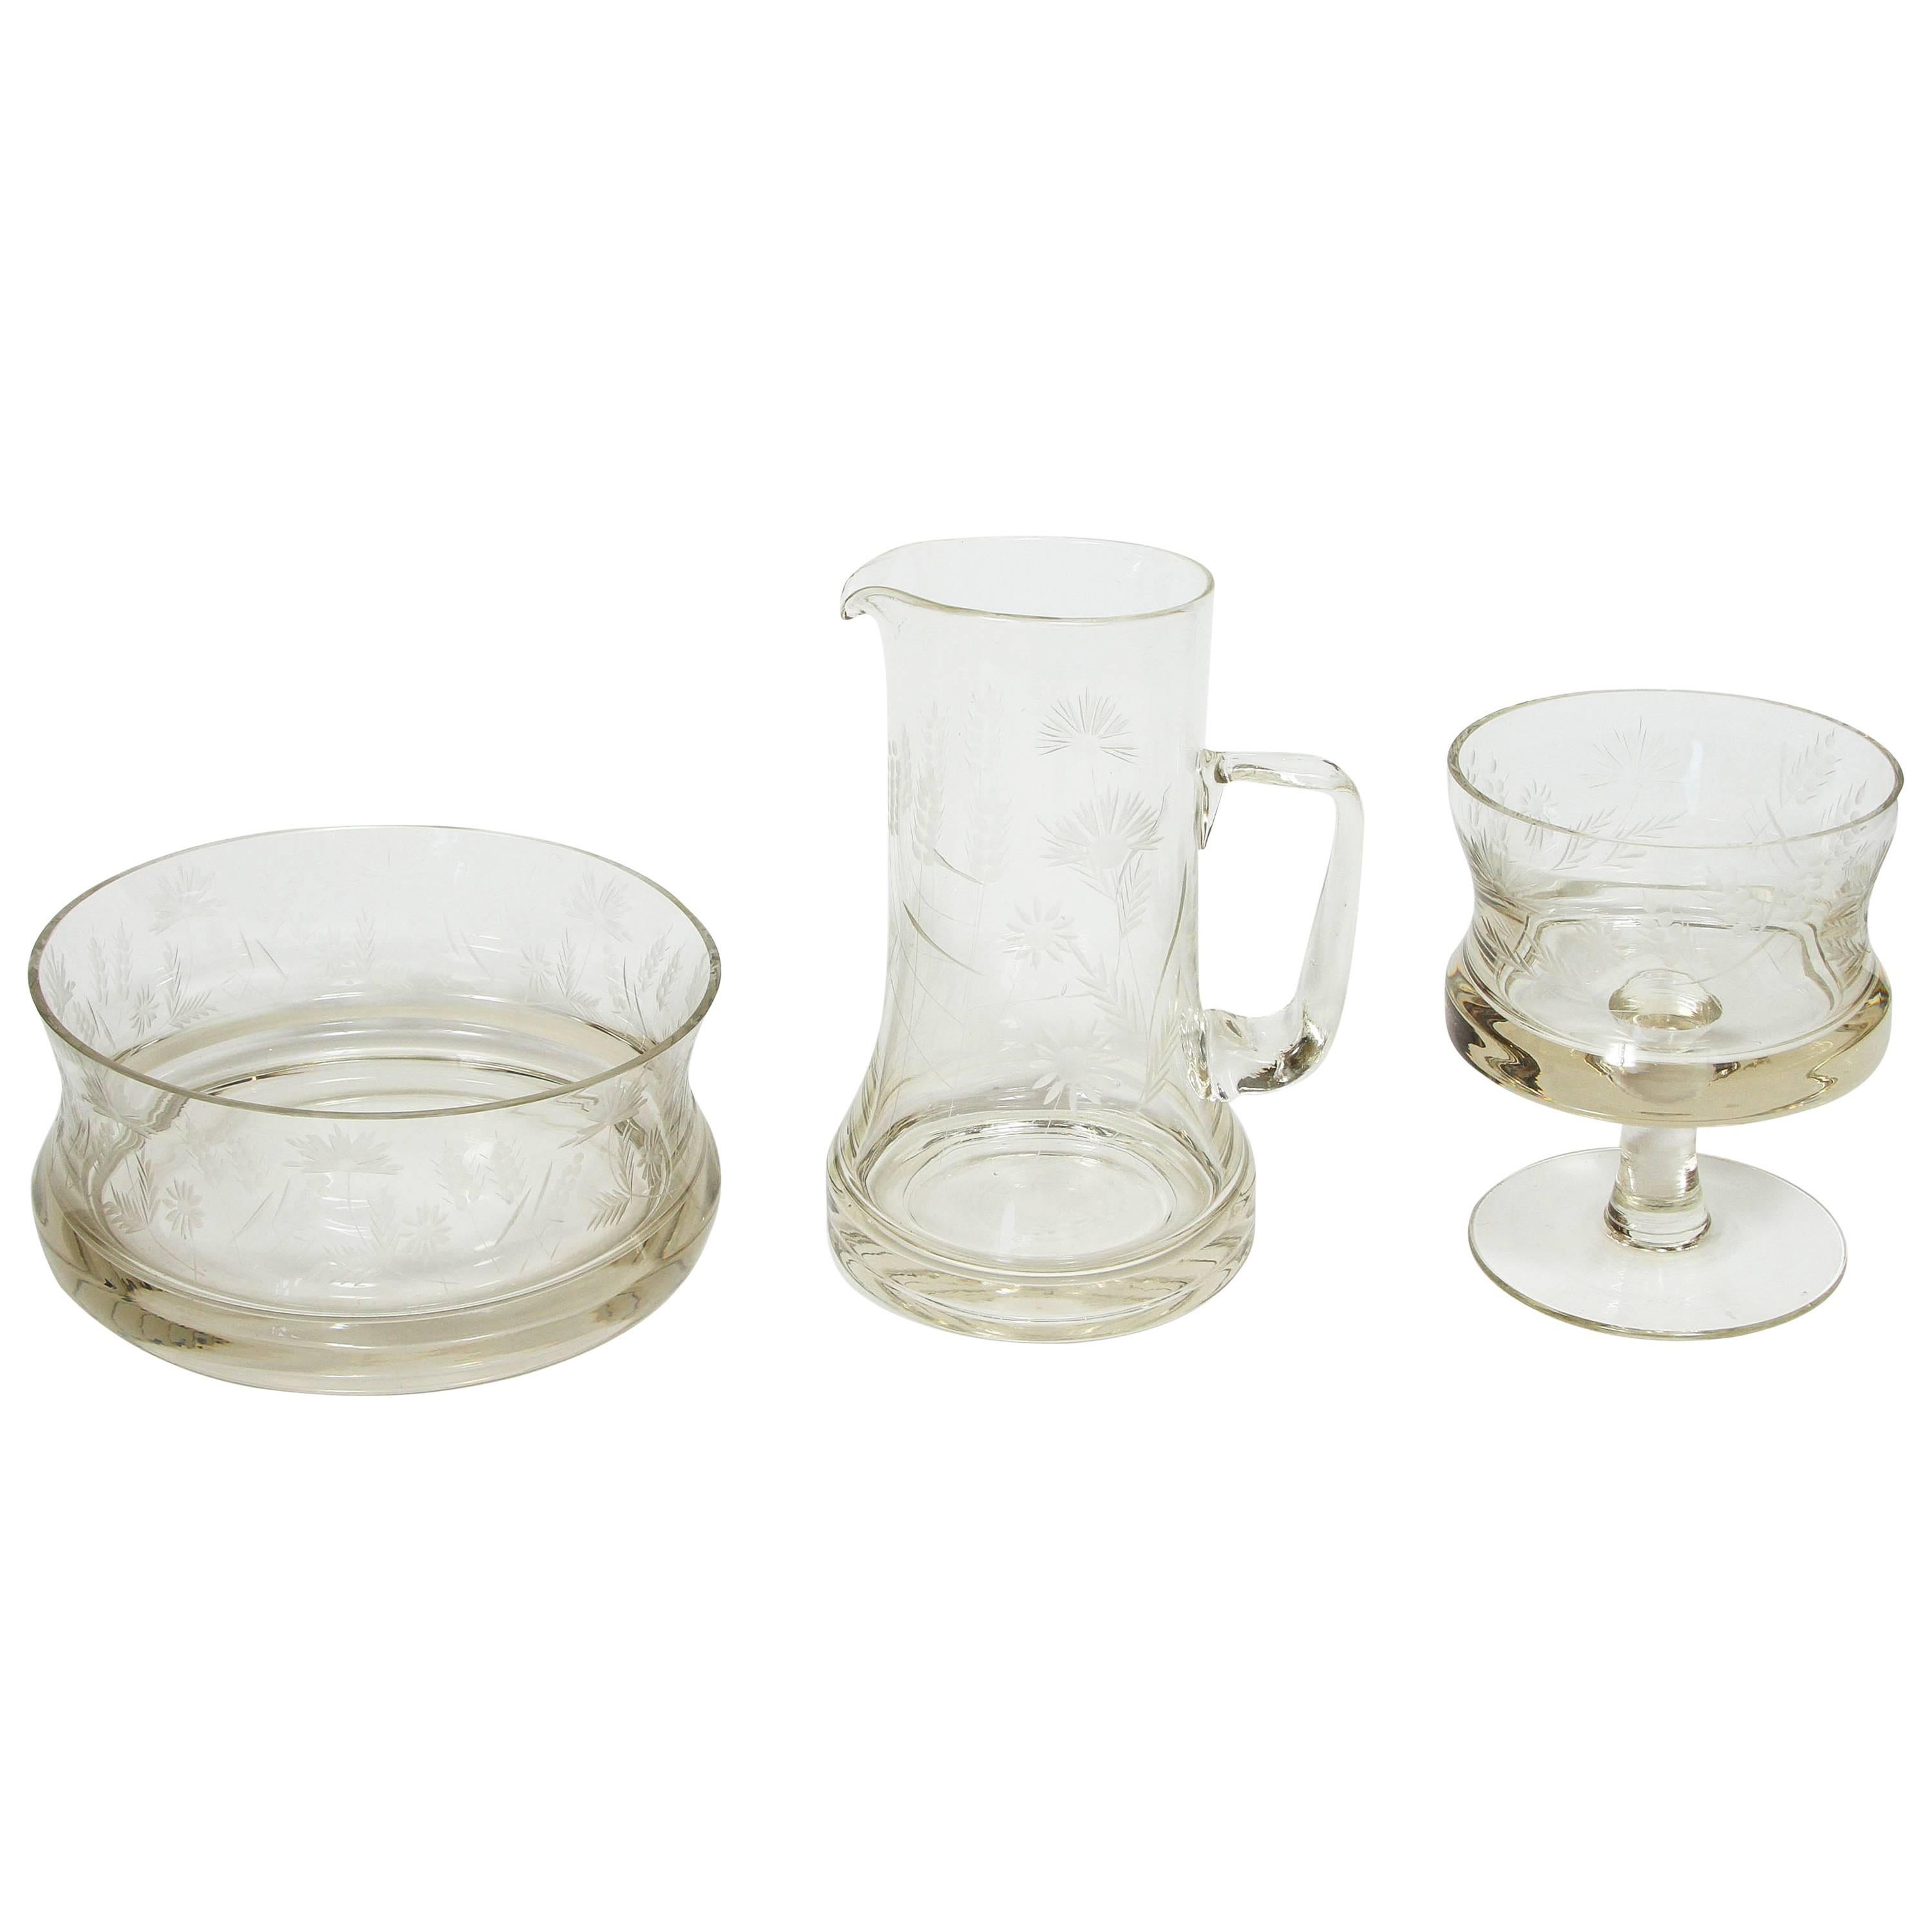 Set of Victorian Glass Serving Pieces